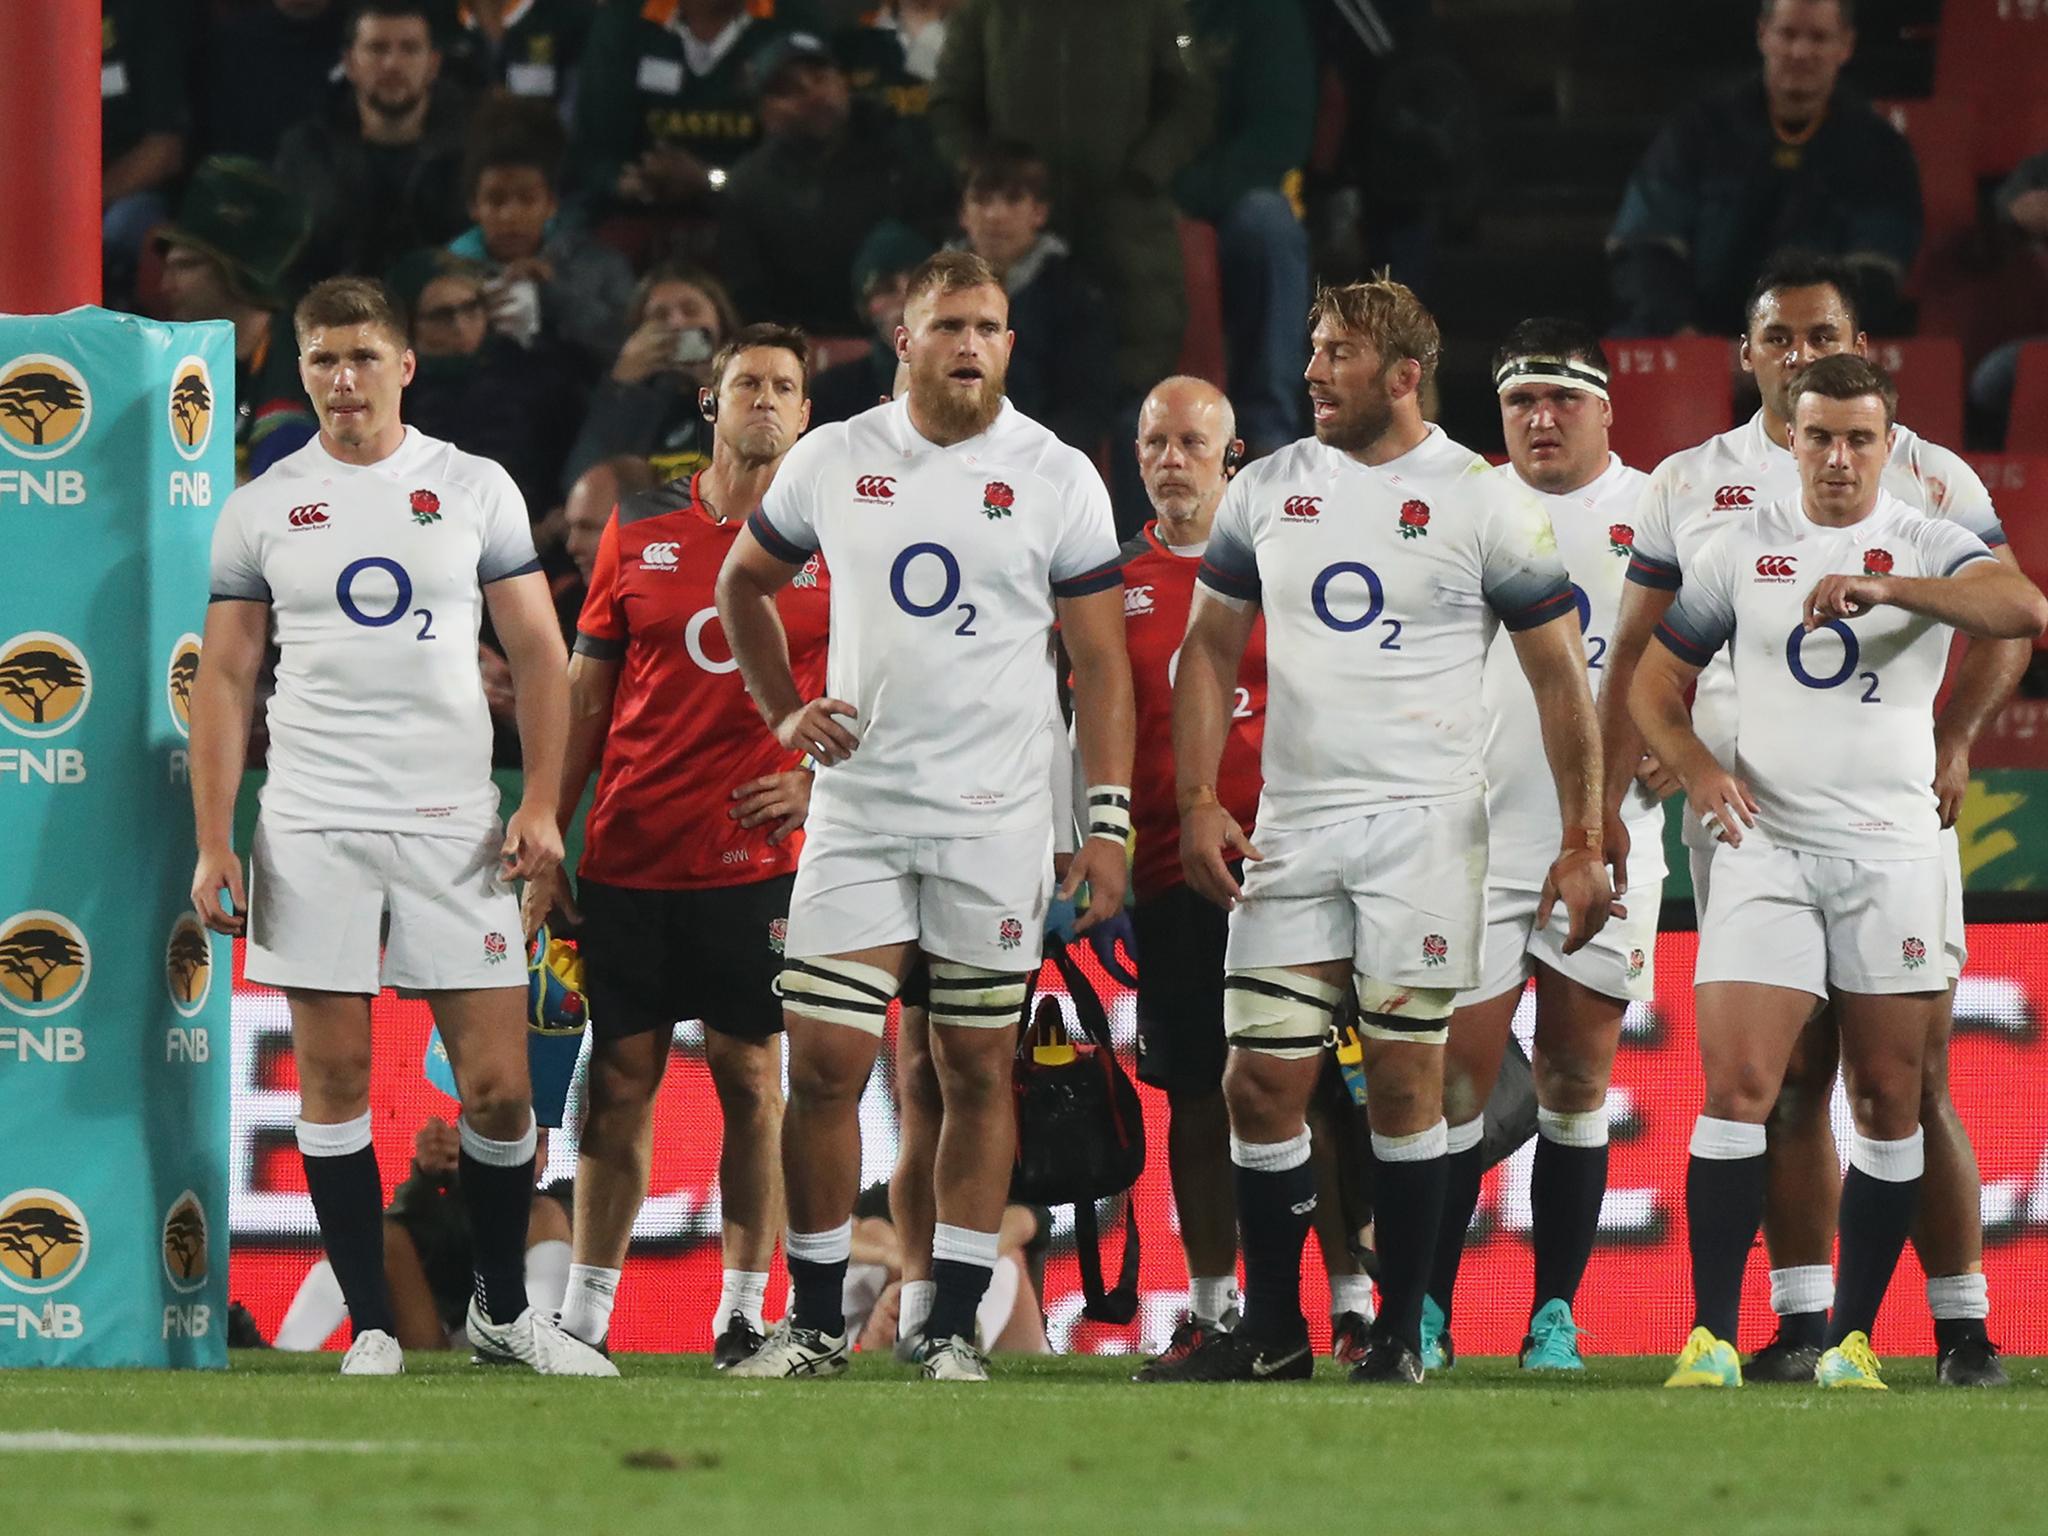 England suffered their fifth straight defeat in a 42-39 loss to South Africa